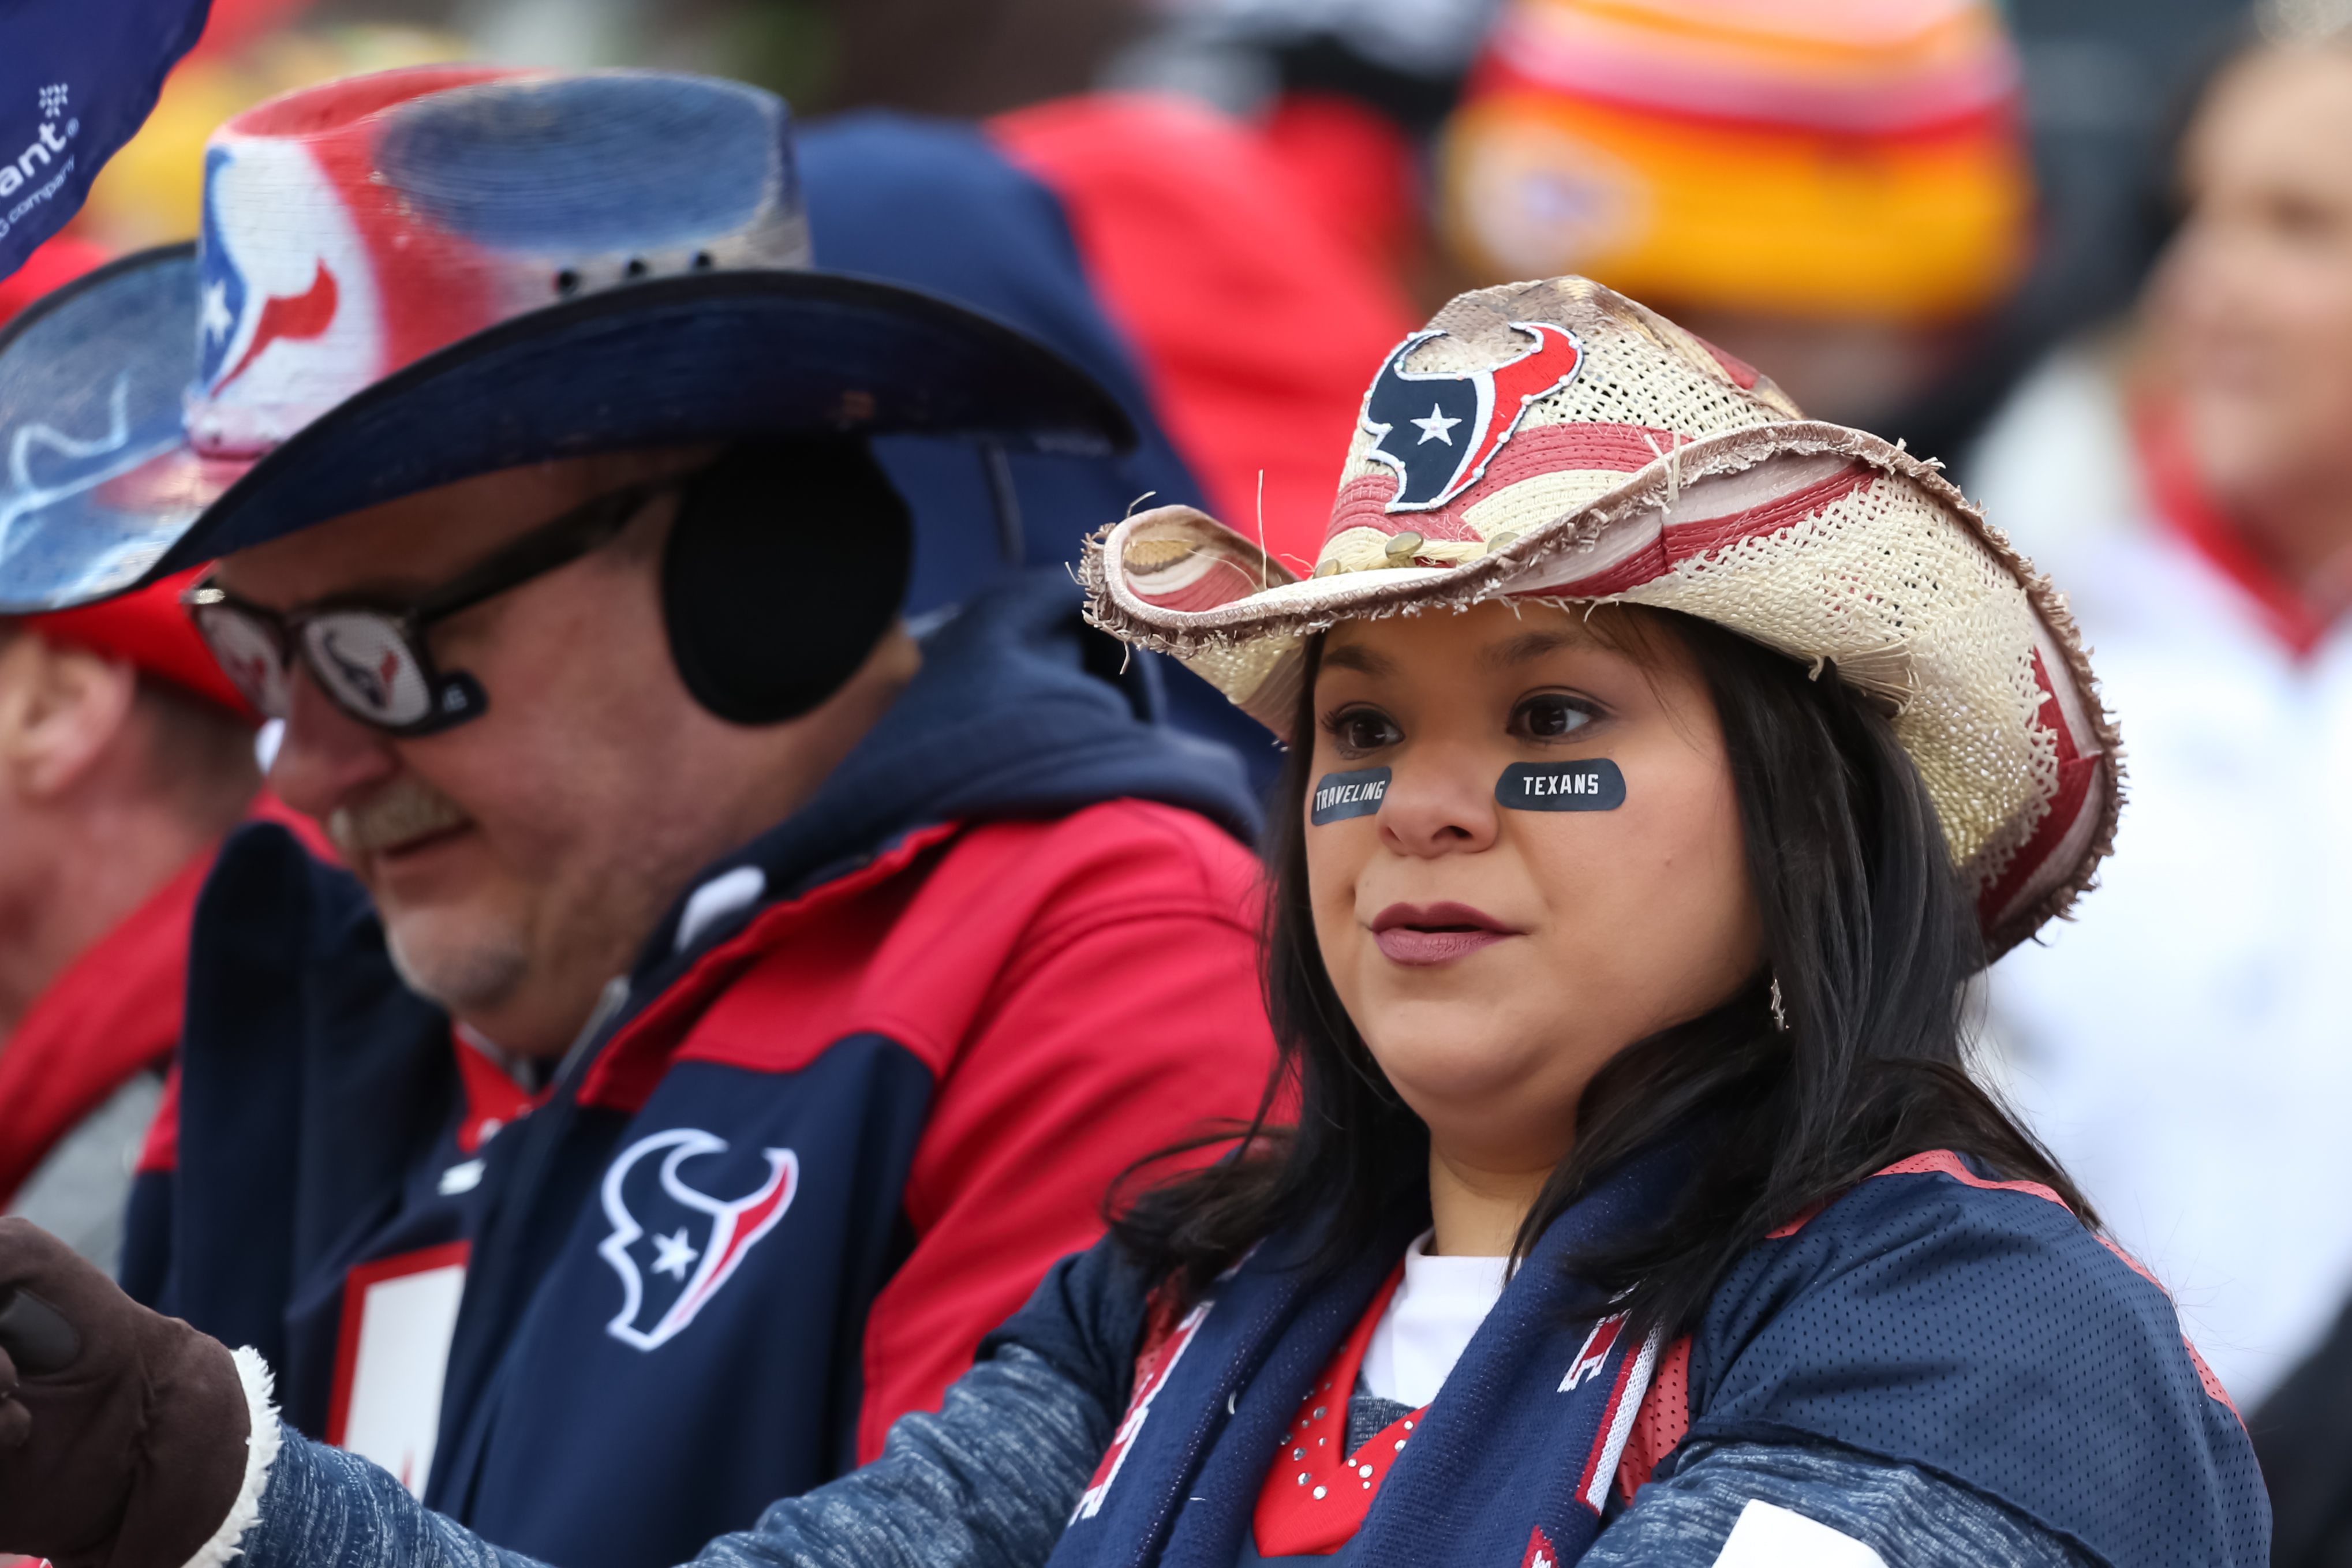 NFL: JAN 12 AFC Divisional Playoff - Texans at Chiefs